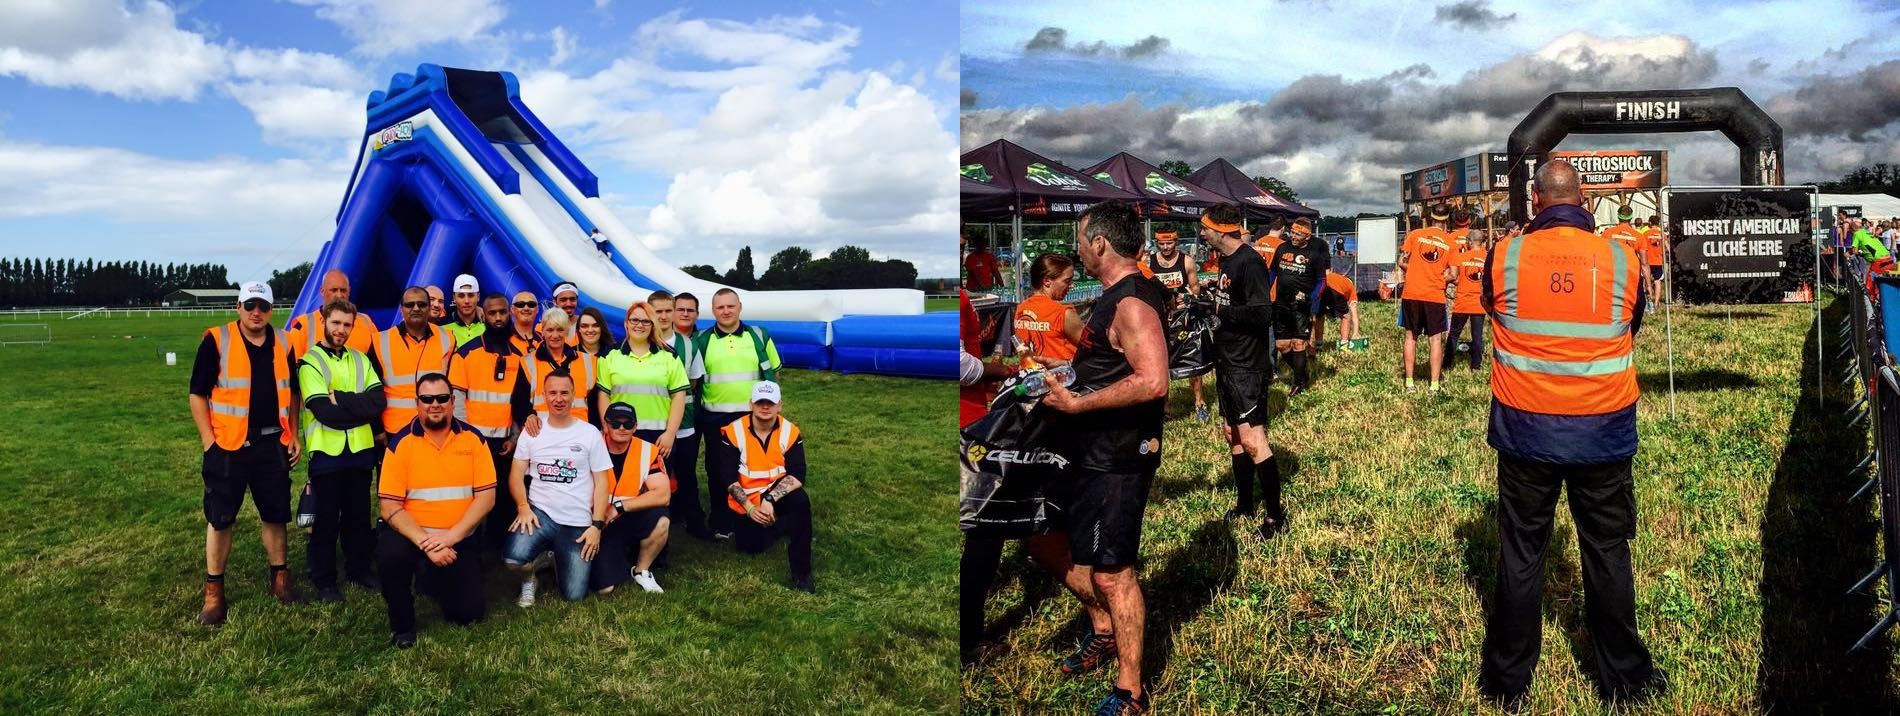 Two images side by side showing Gallowglass Security officers on duty at various events.